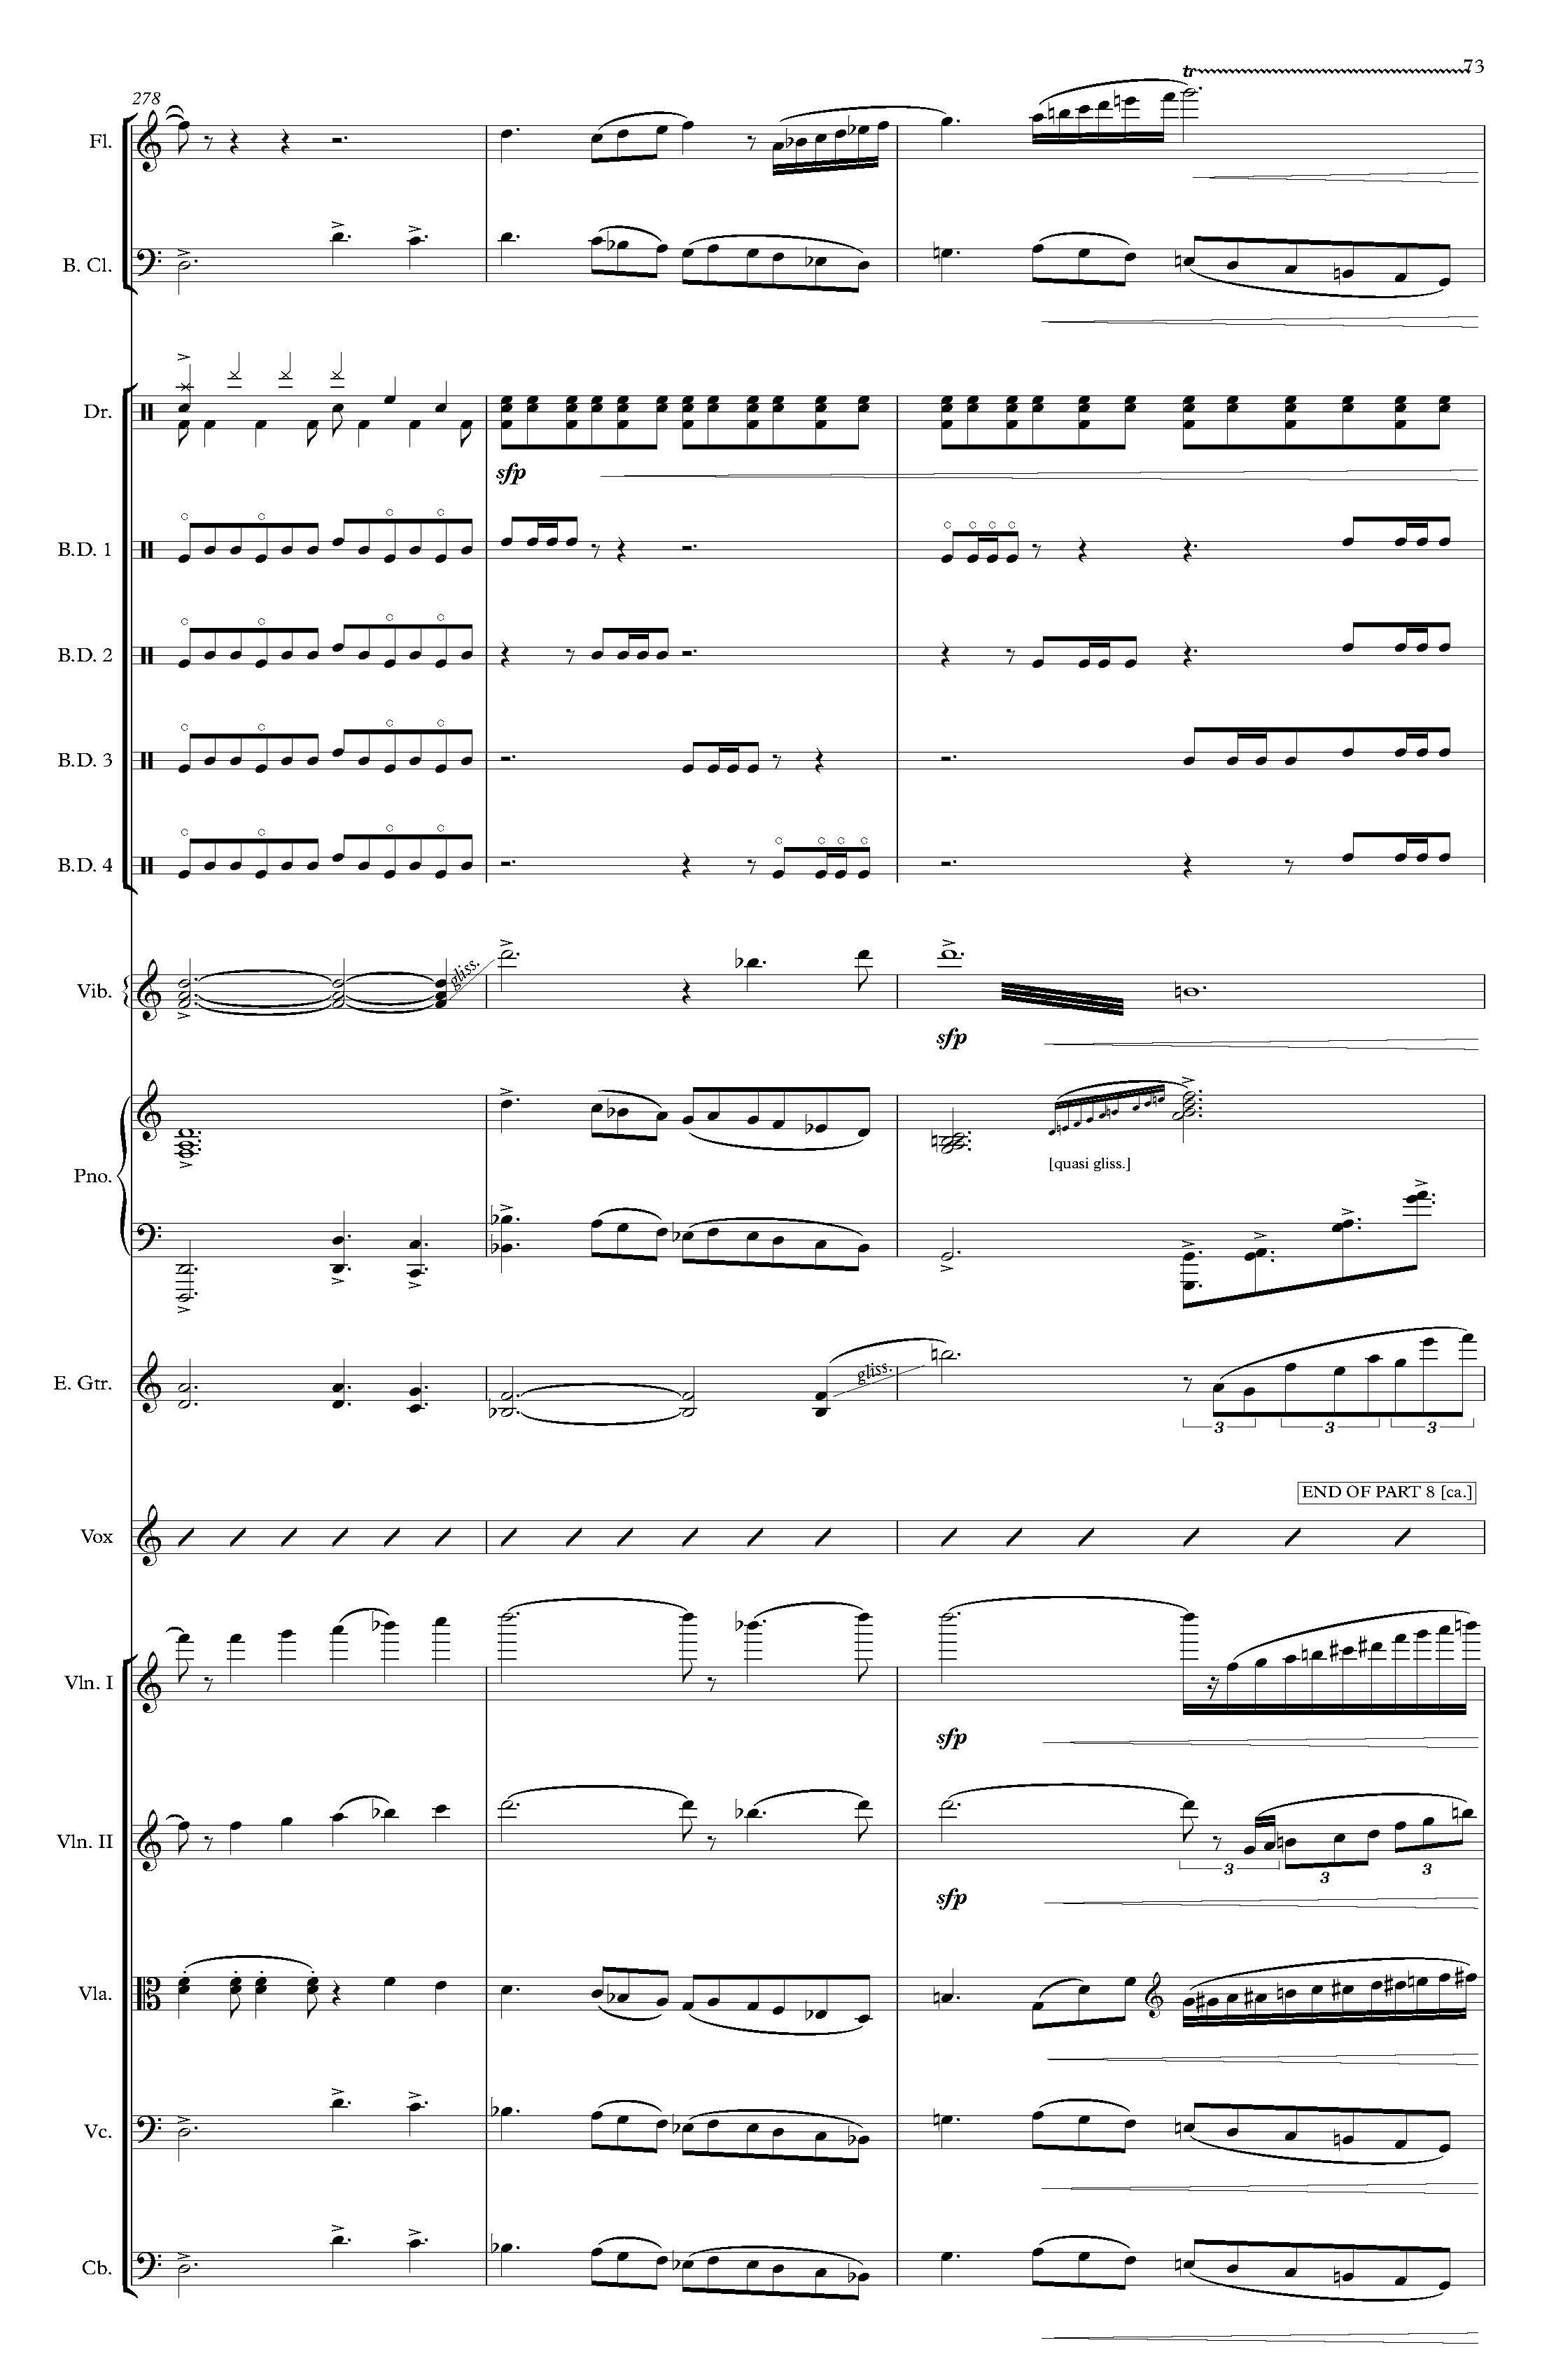 The Rembrandt of Avenue A - Complete Score_Page_79.jpg